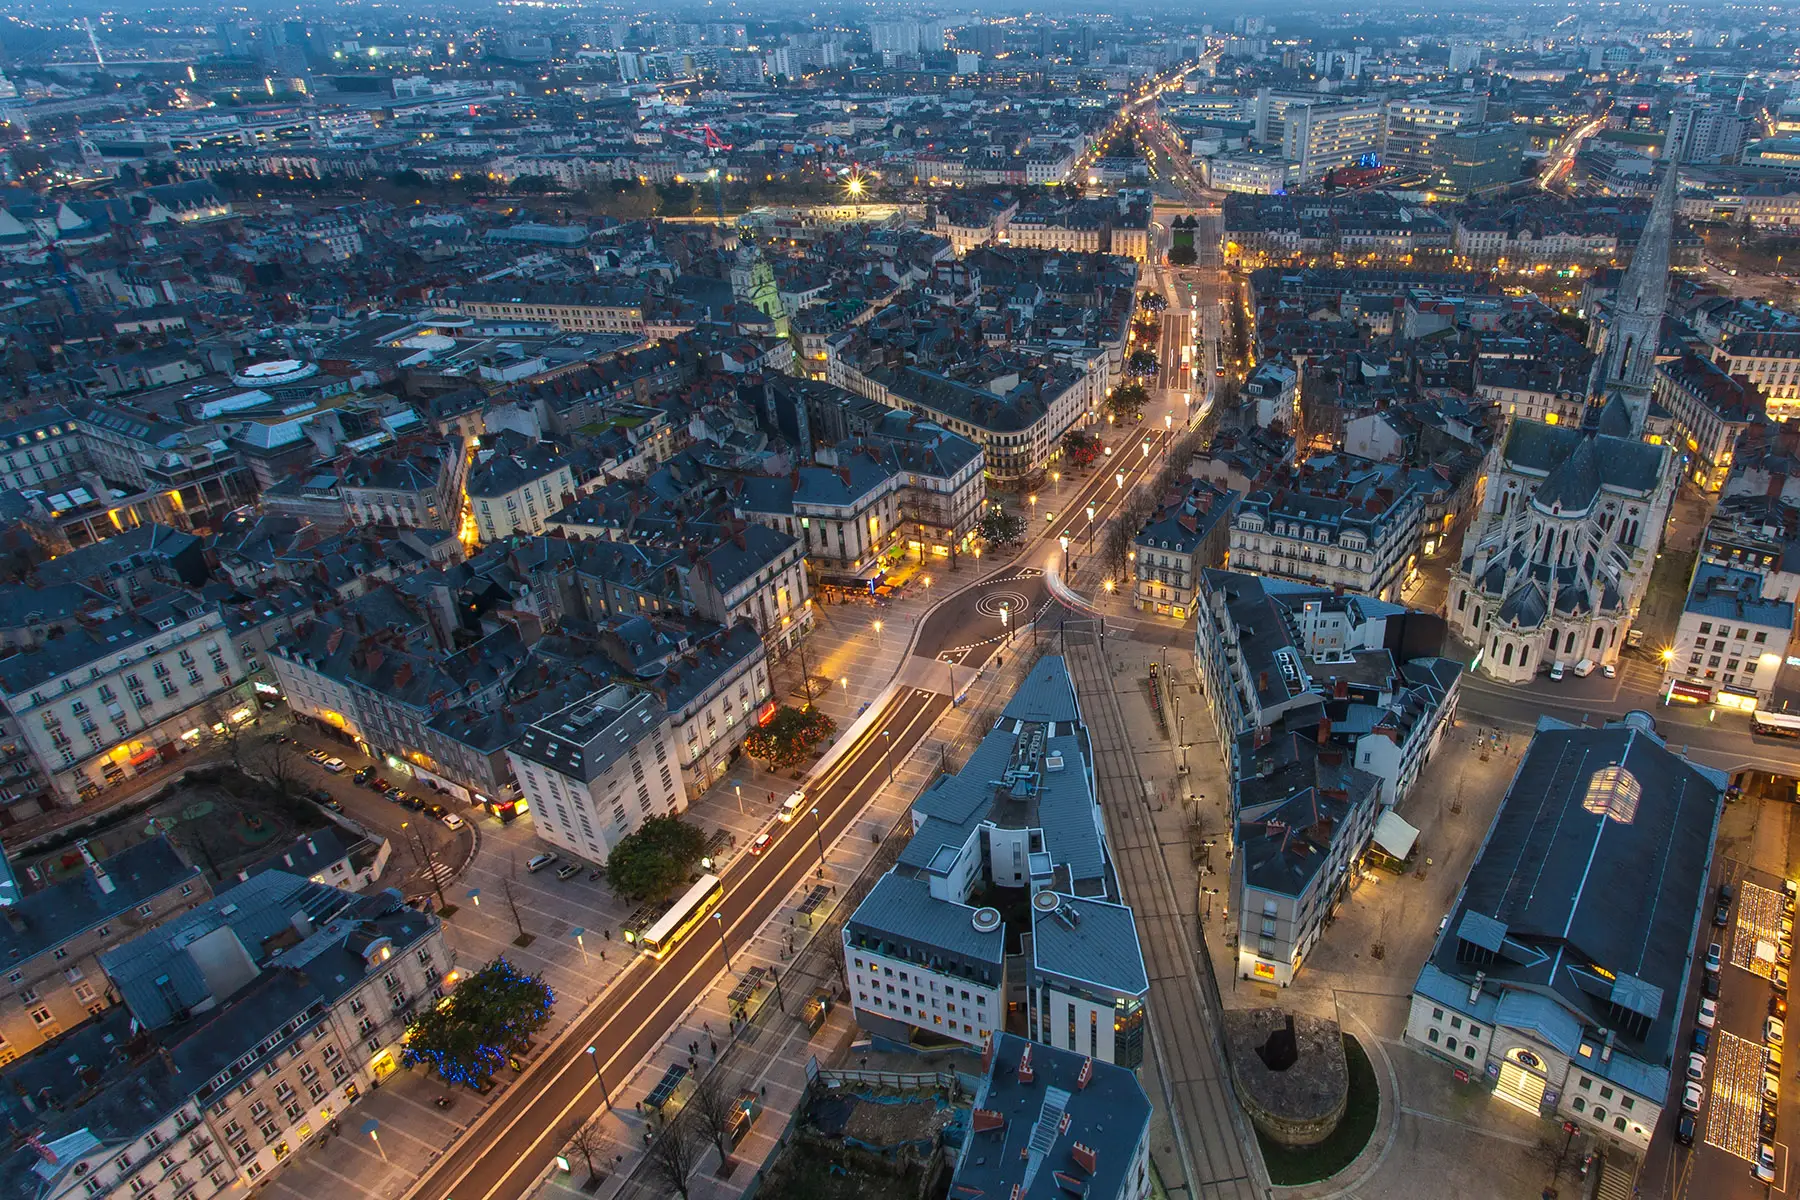 Overhead view of Nantes, France